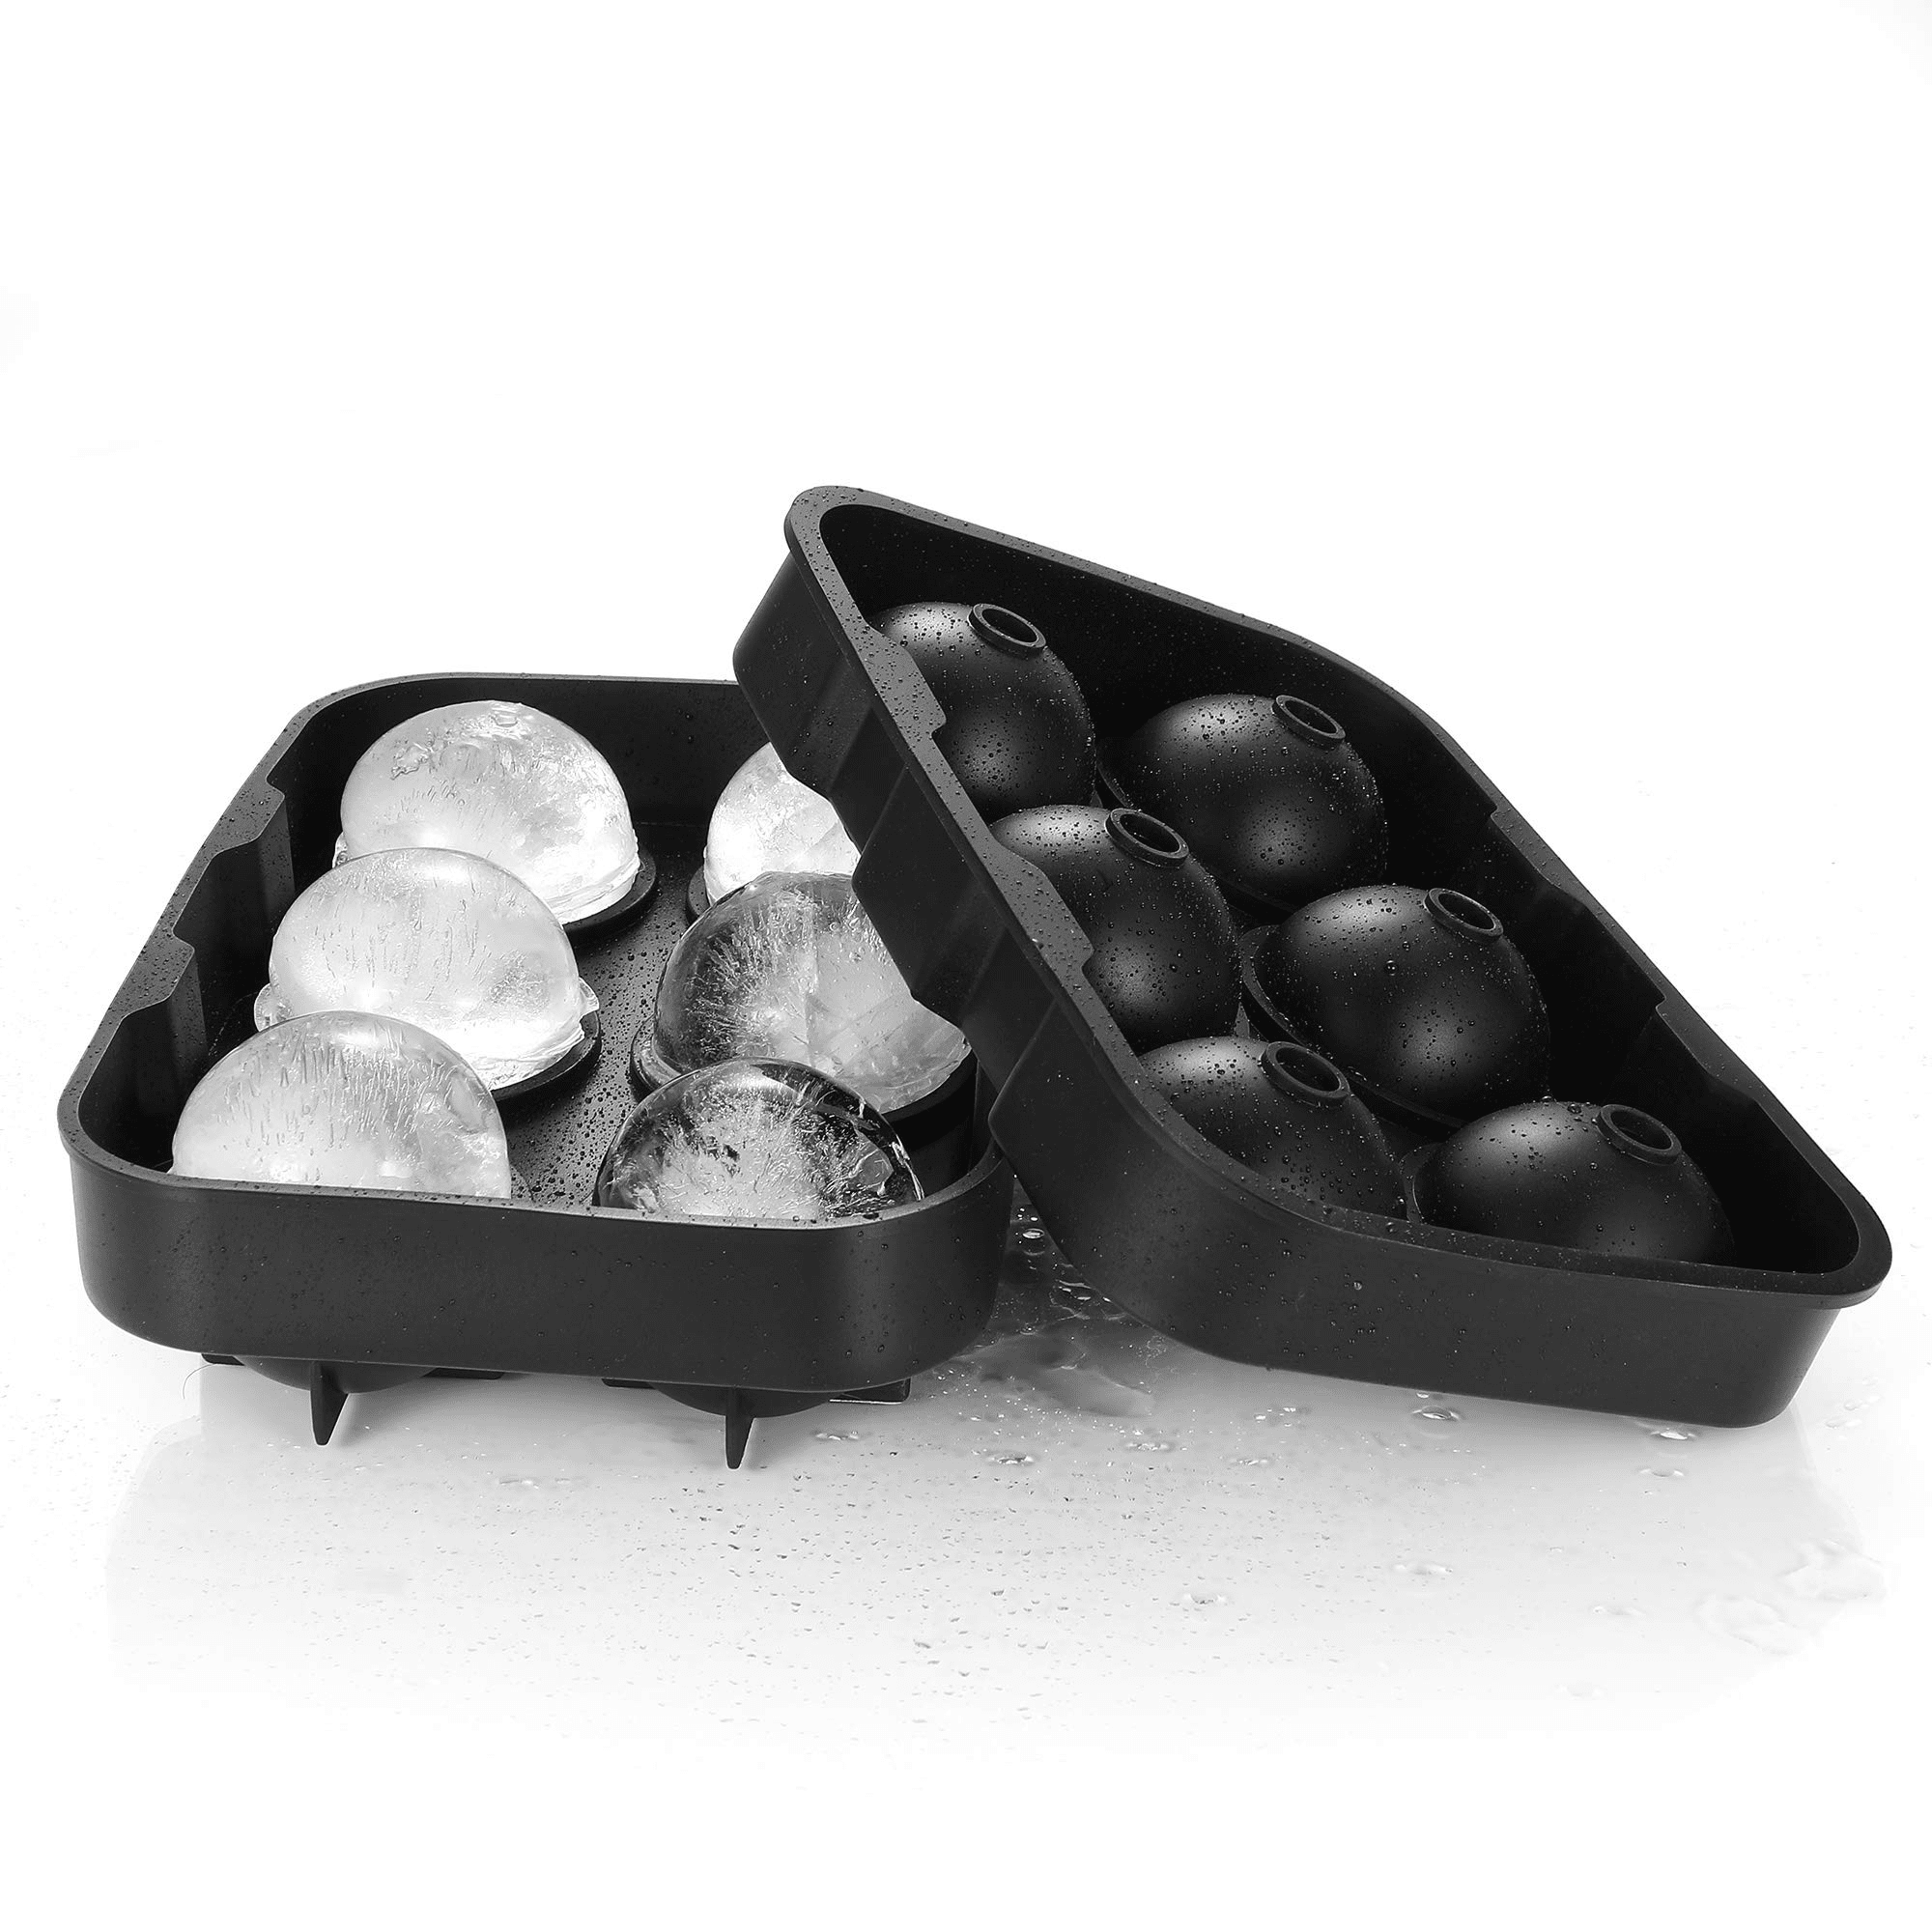 Deago Ice Cube Trays, Diamond Shaped Fun Ice Cube Molds Silicone Flexible  Ice Maker for Chilling Whiskey Cocktails (1 Set Black) 